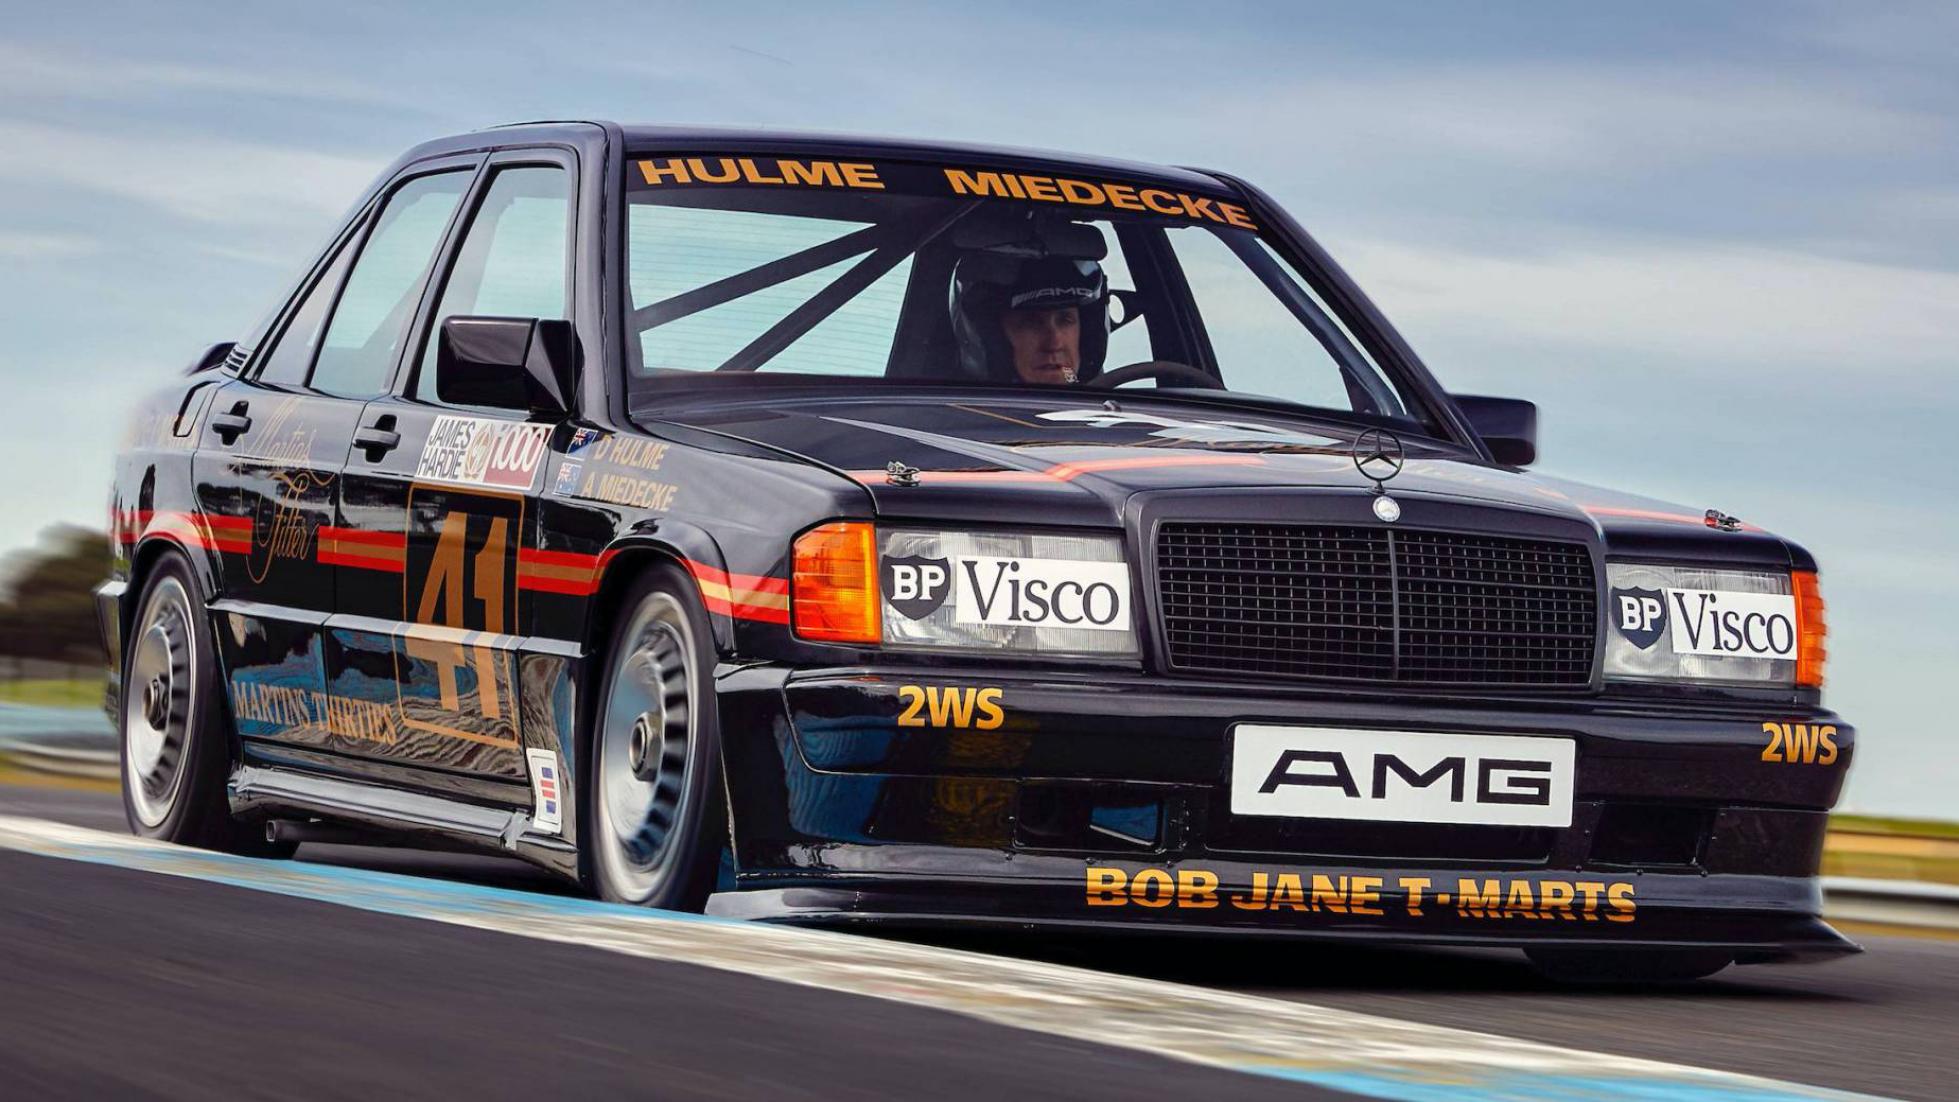 Stop what you’re doing and look at this Merc 190 E touring car